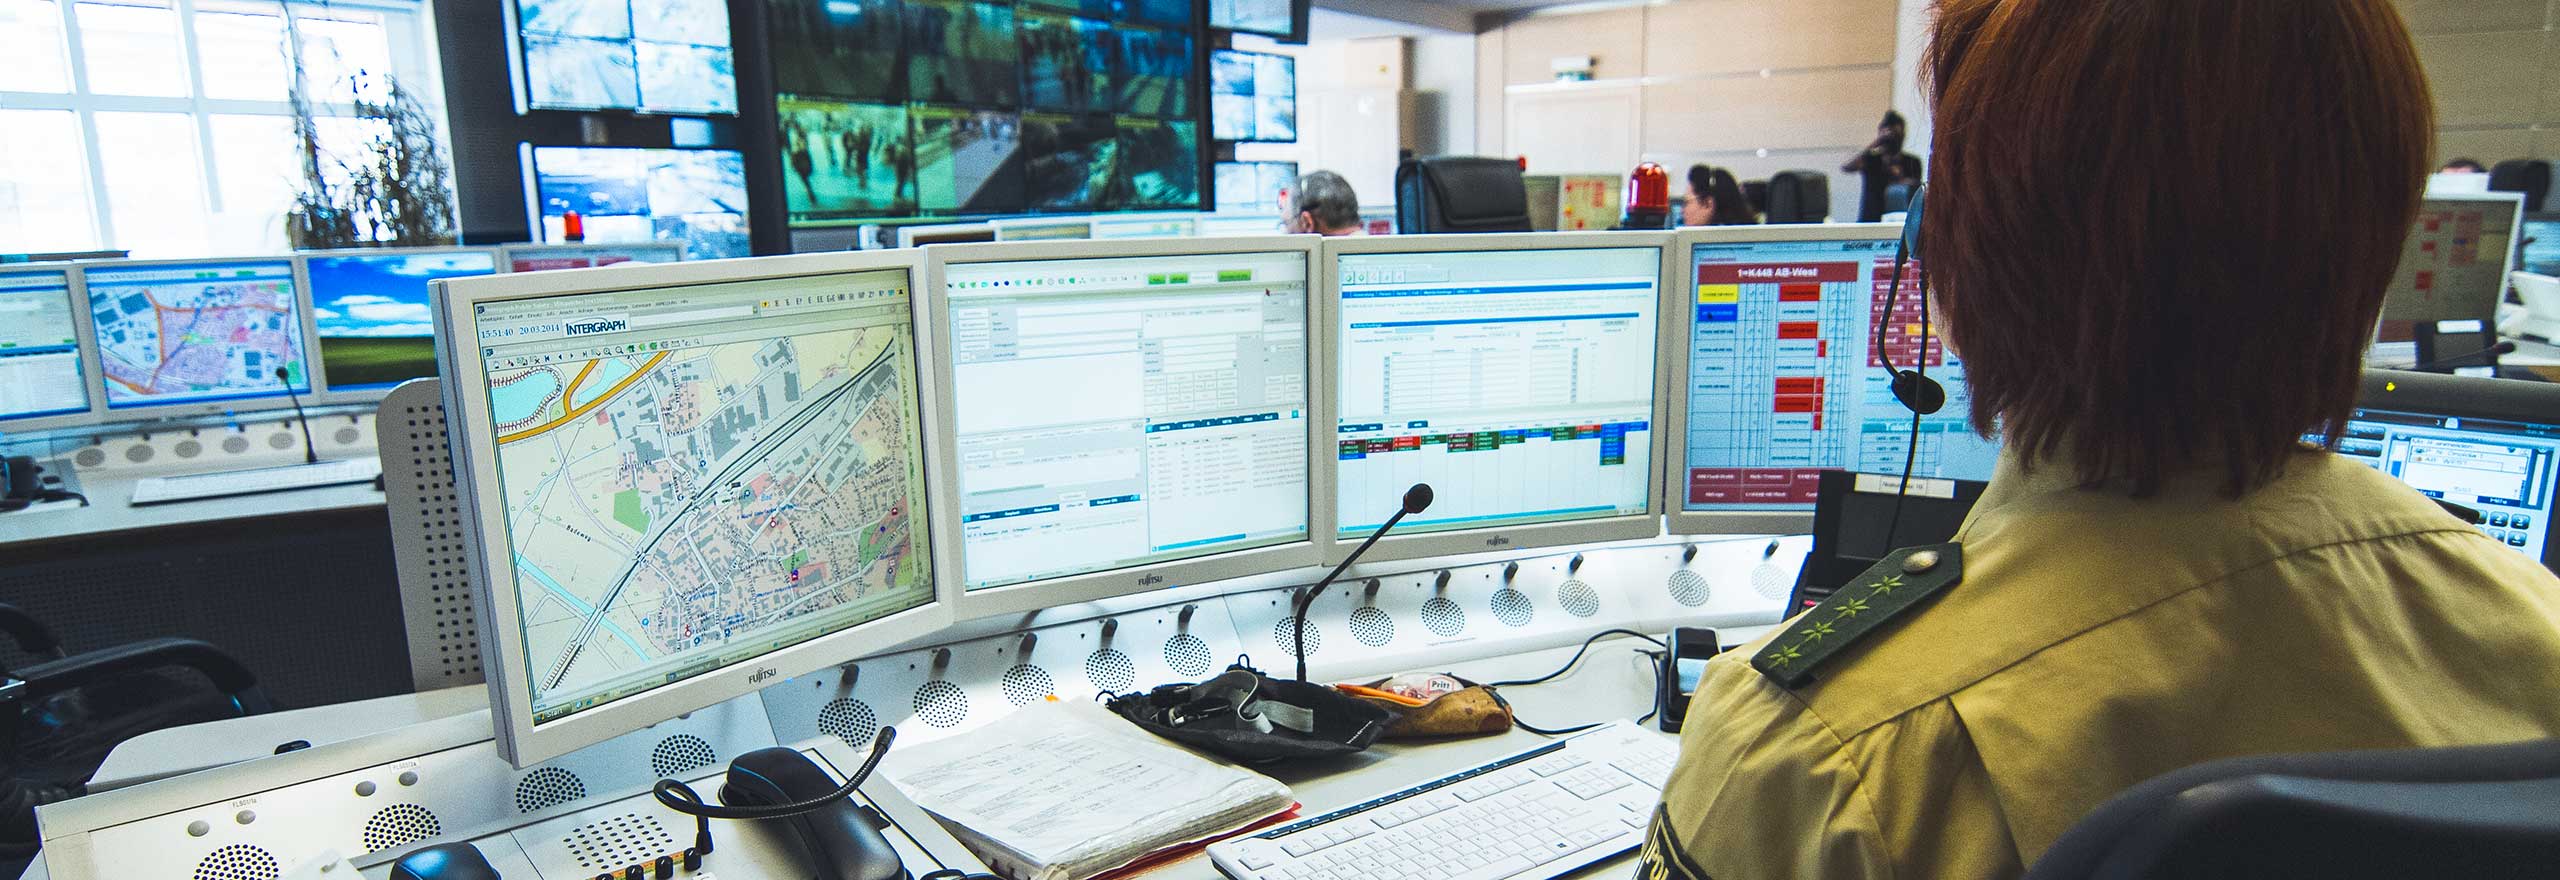 Emergency management solutions in action in Germany 